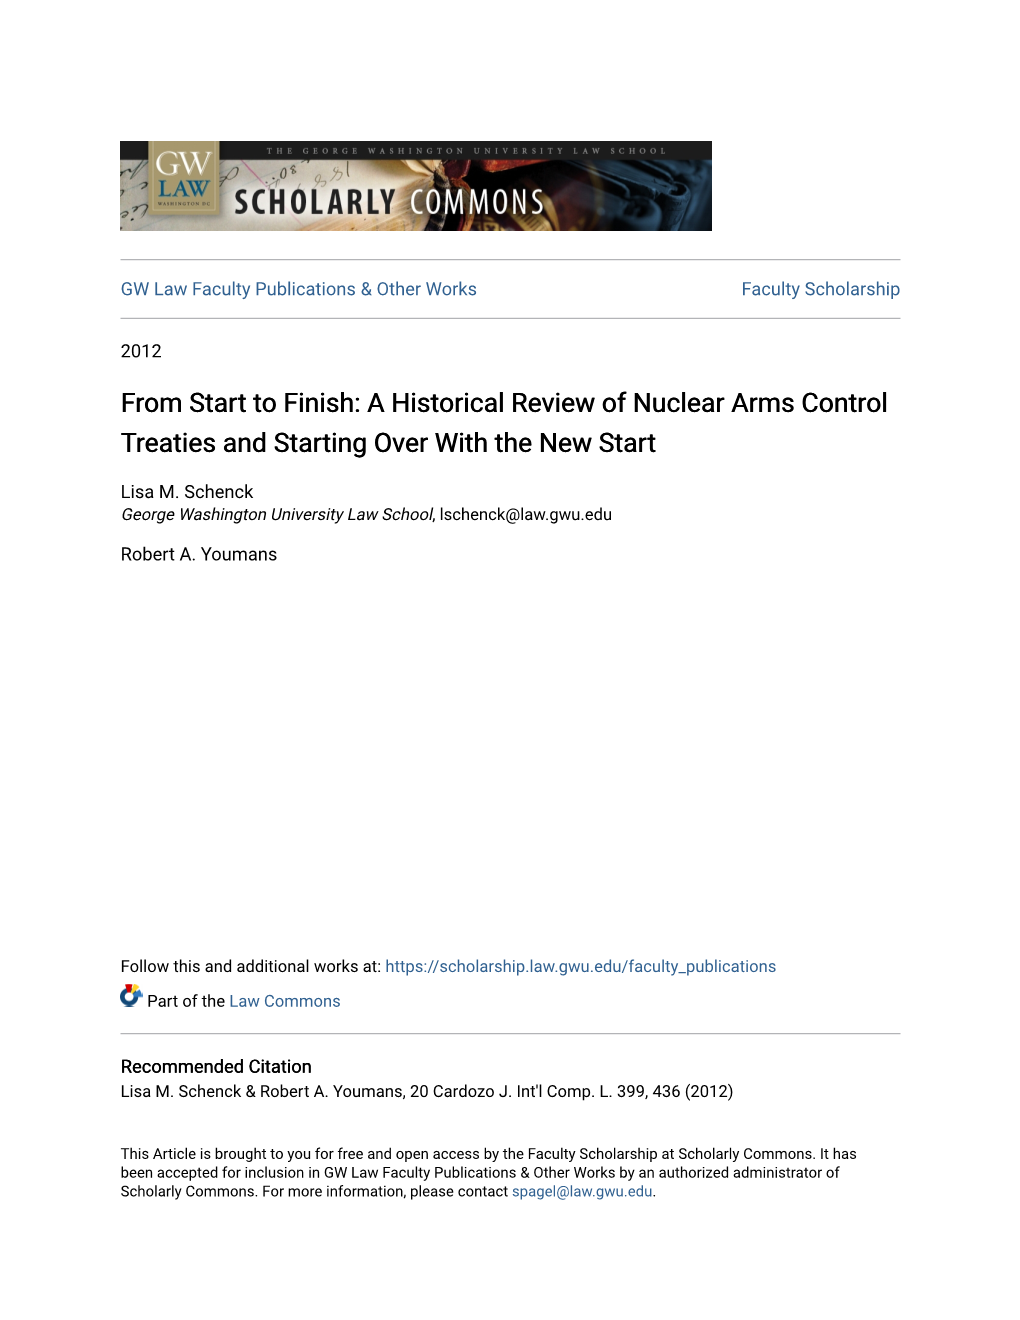 A Historical Review of Nuclear Arms Control Treaties and Starting Over with the New Start